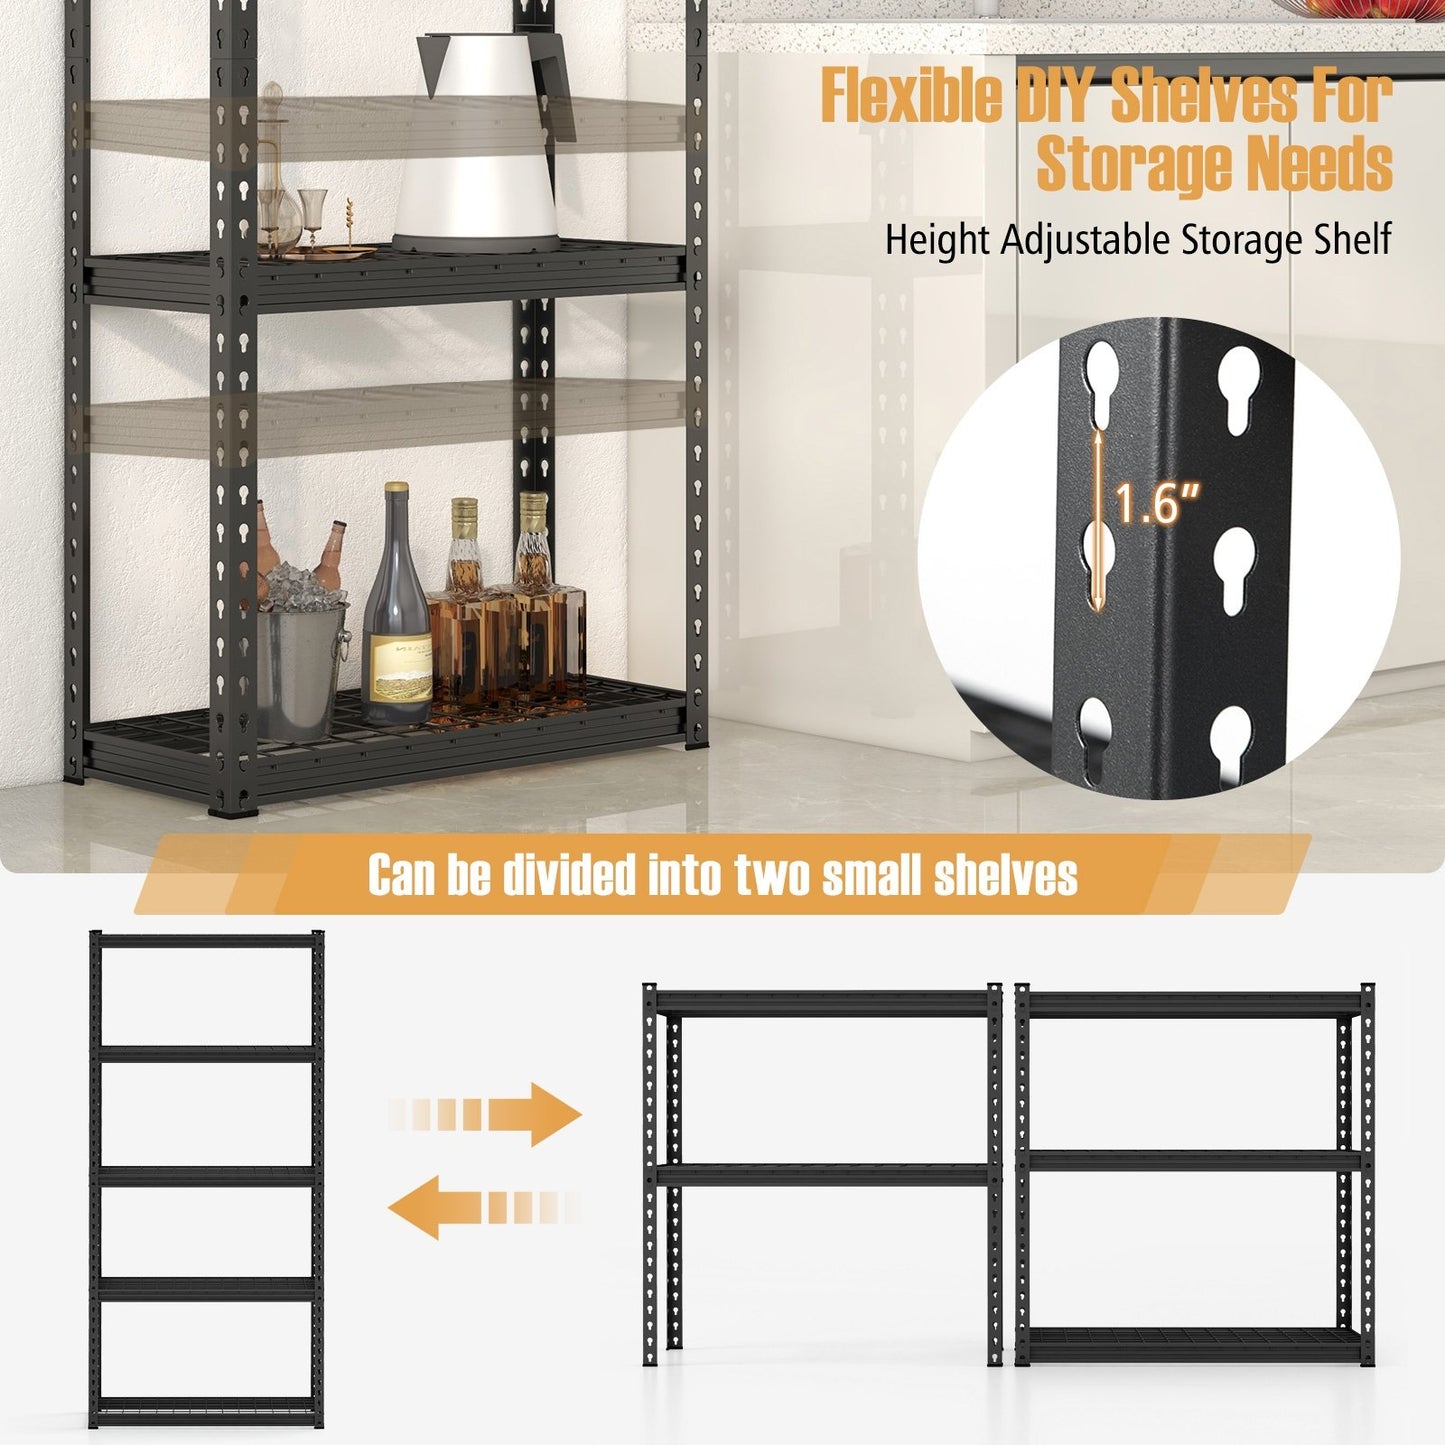 5-Tier Metal Shelving Unit with Anti-slip Foot Pad Height Adjustable Shelves for Garage-M, Black